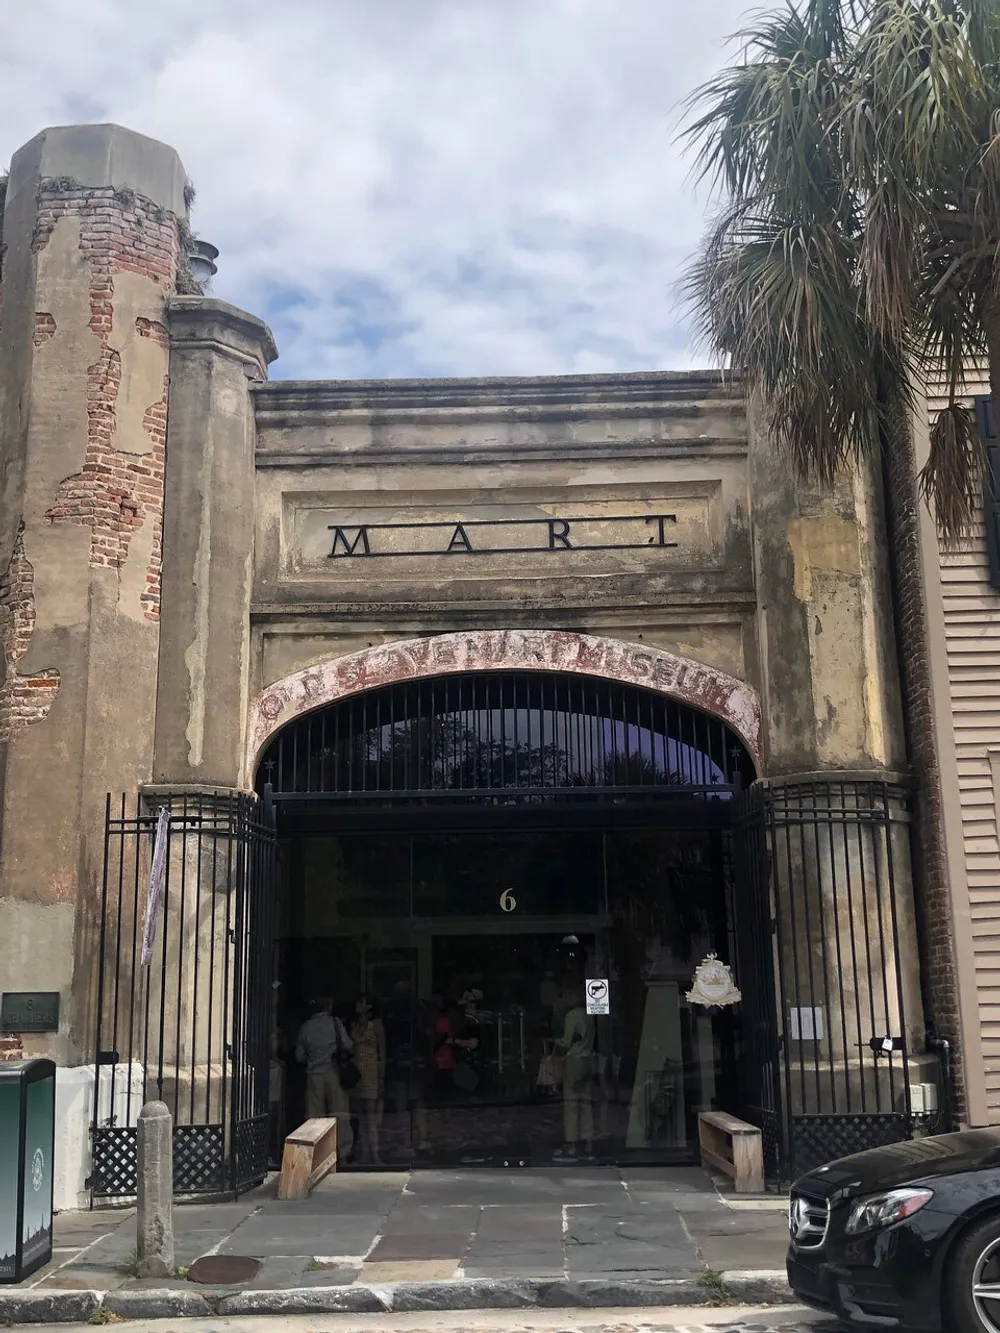 The image displays the entrance to a building with the word MART inscribed above the archway featuring a weathered facade and people near the doorway